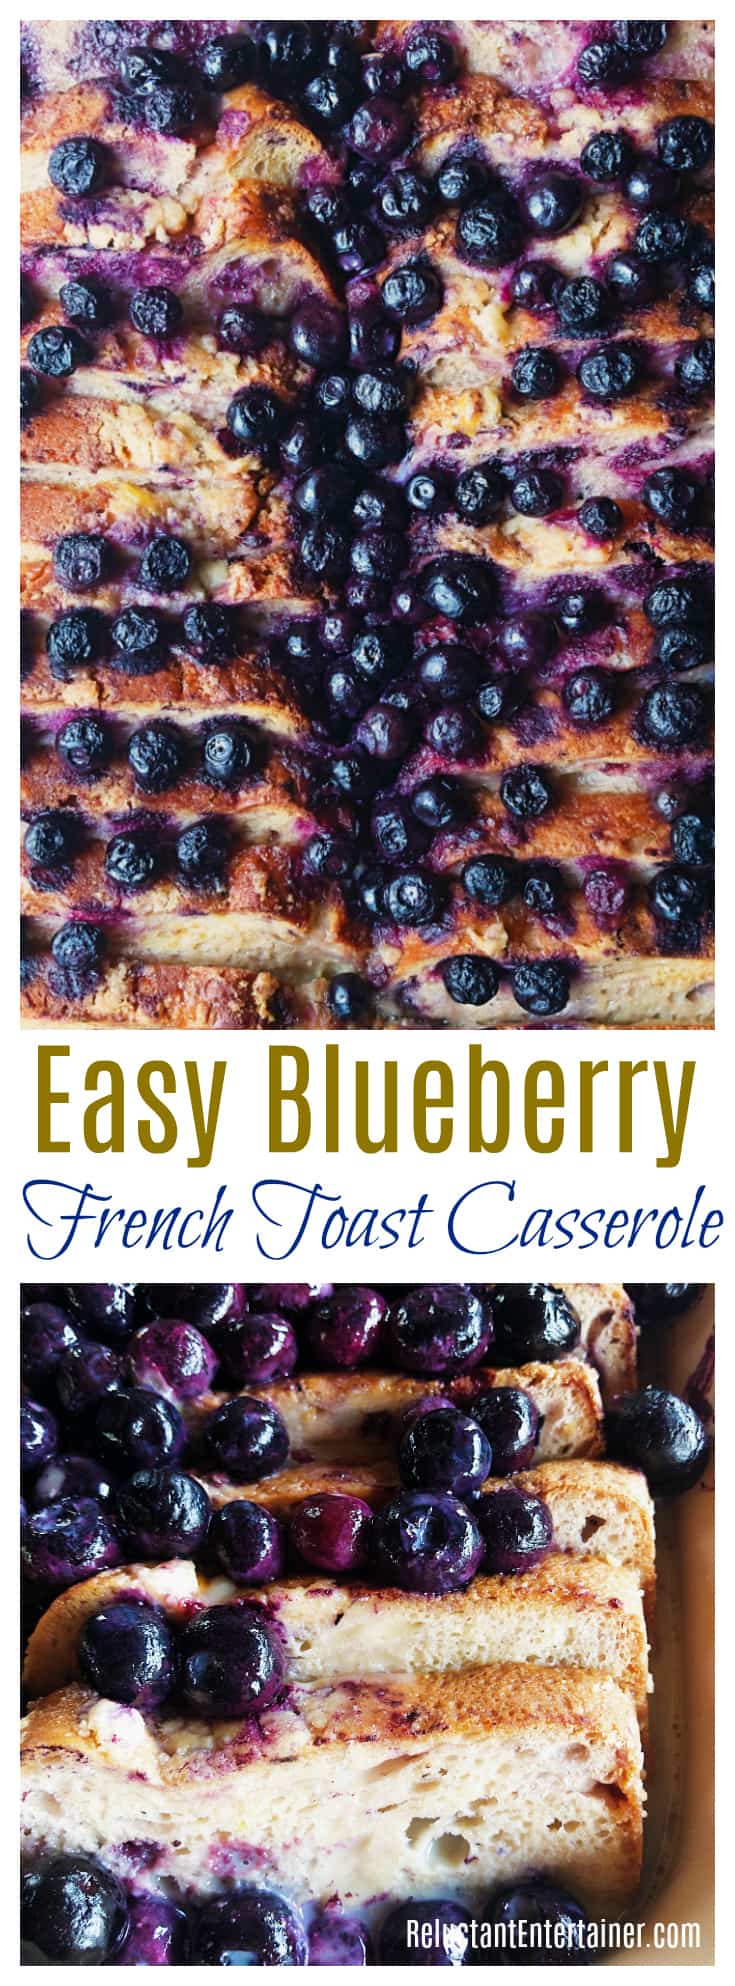 Easy Blueberry French Toast Casserole